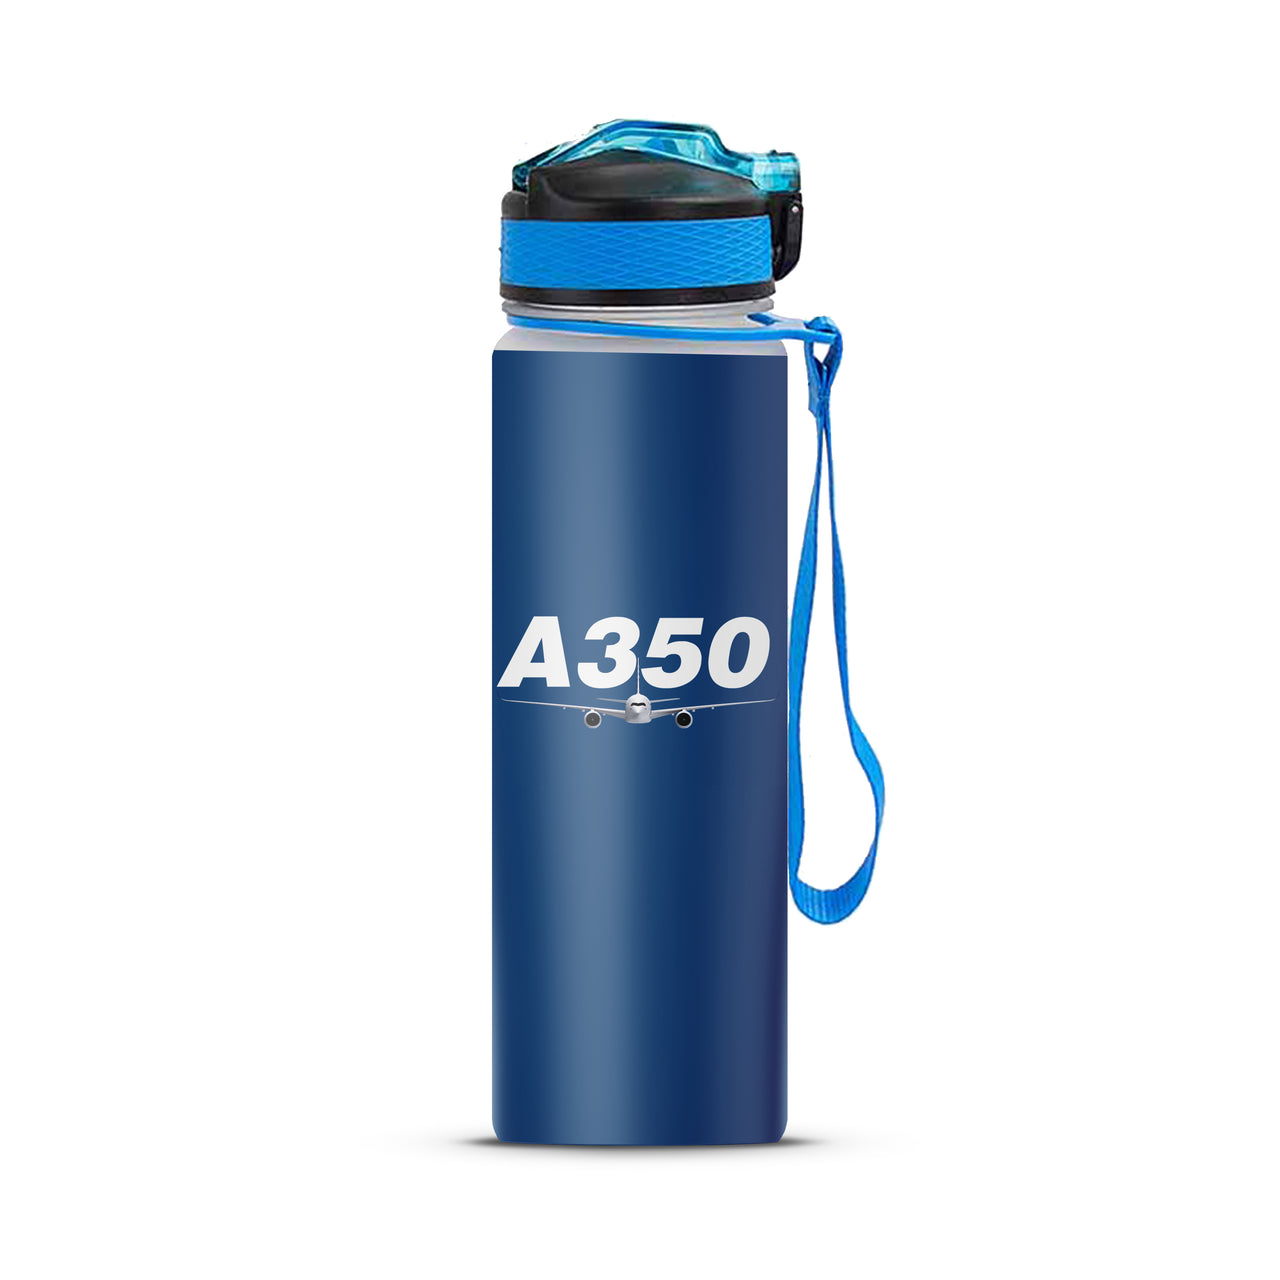 Super Airbus A350 Designed Sports Kettles